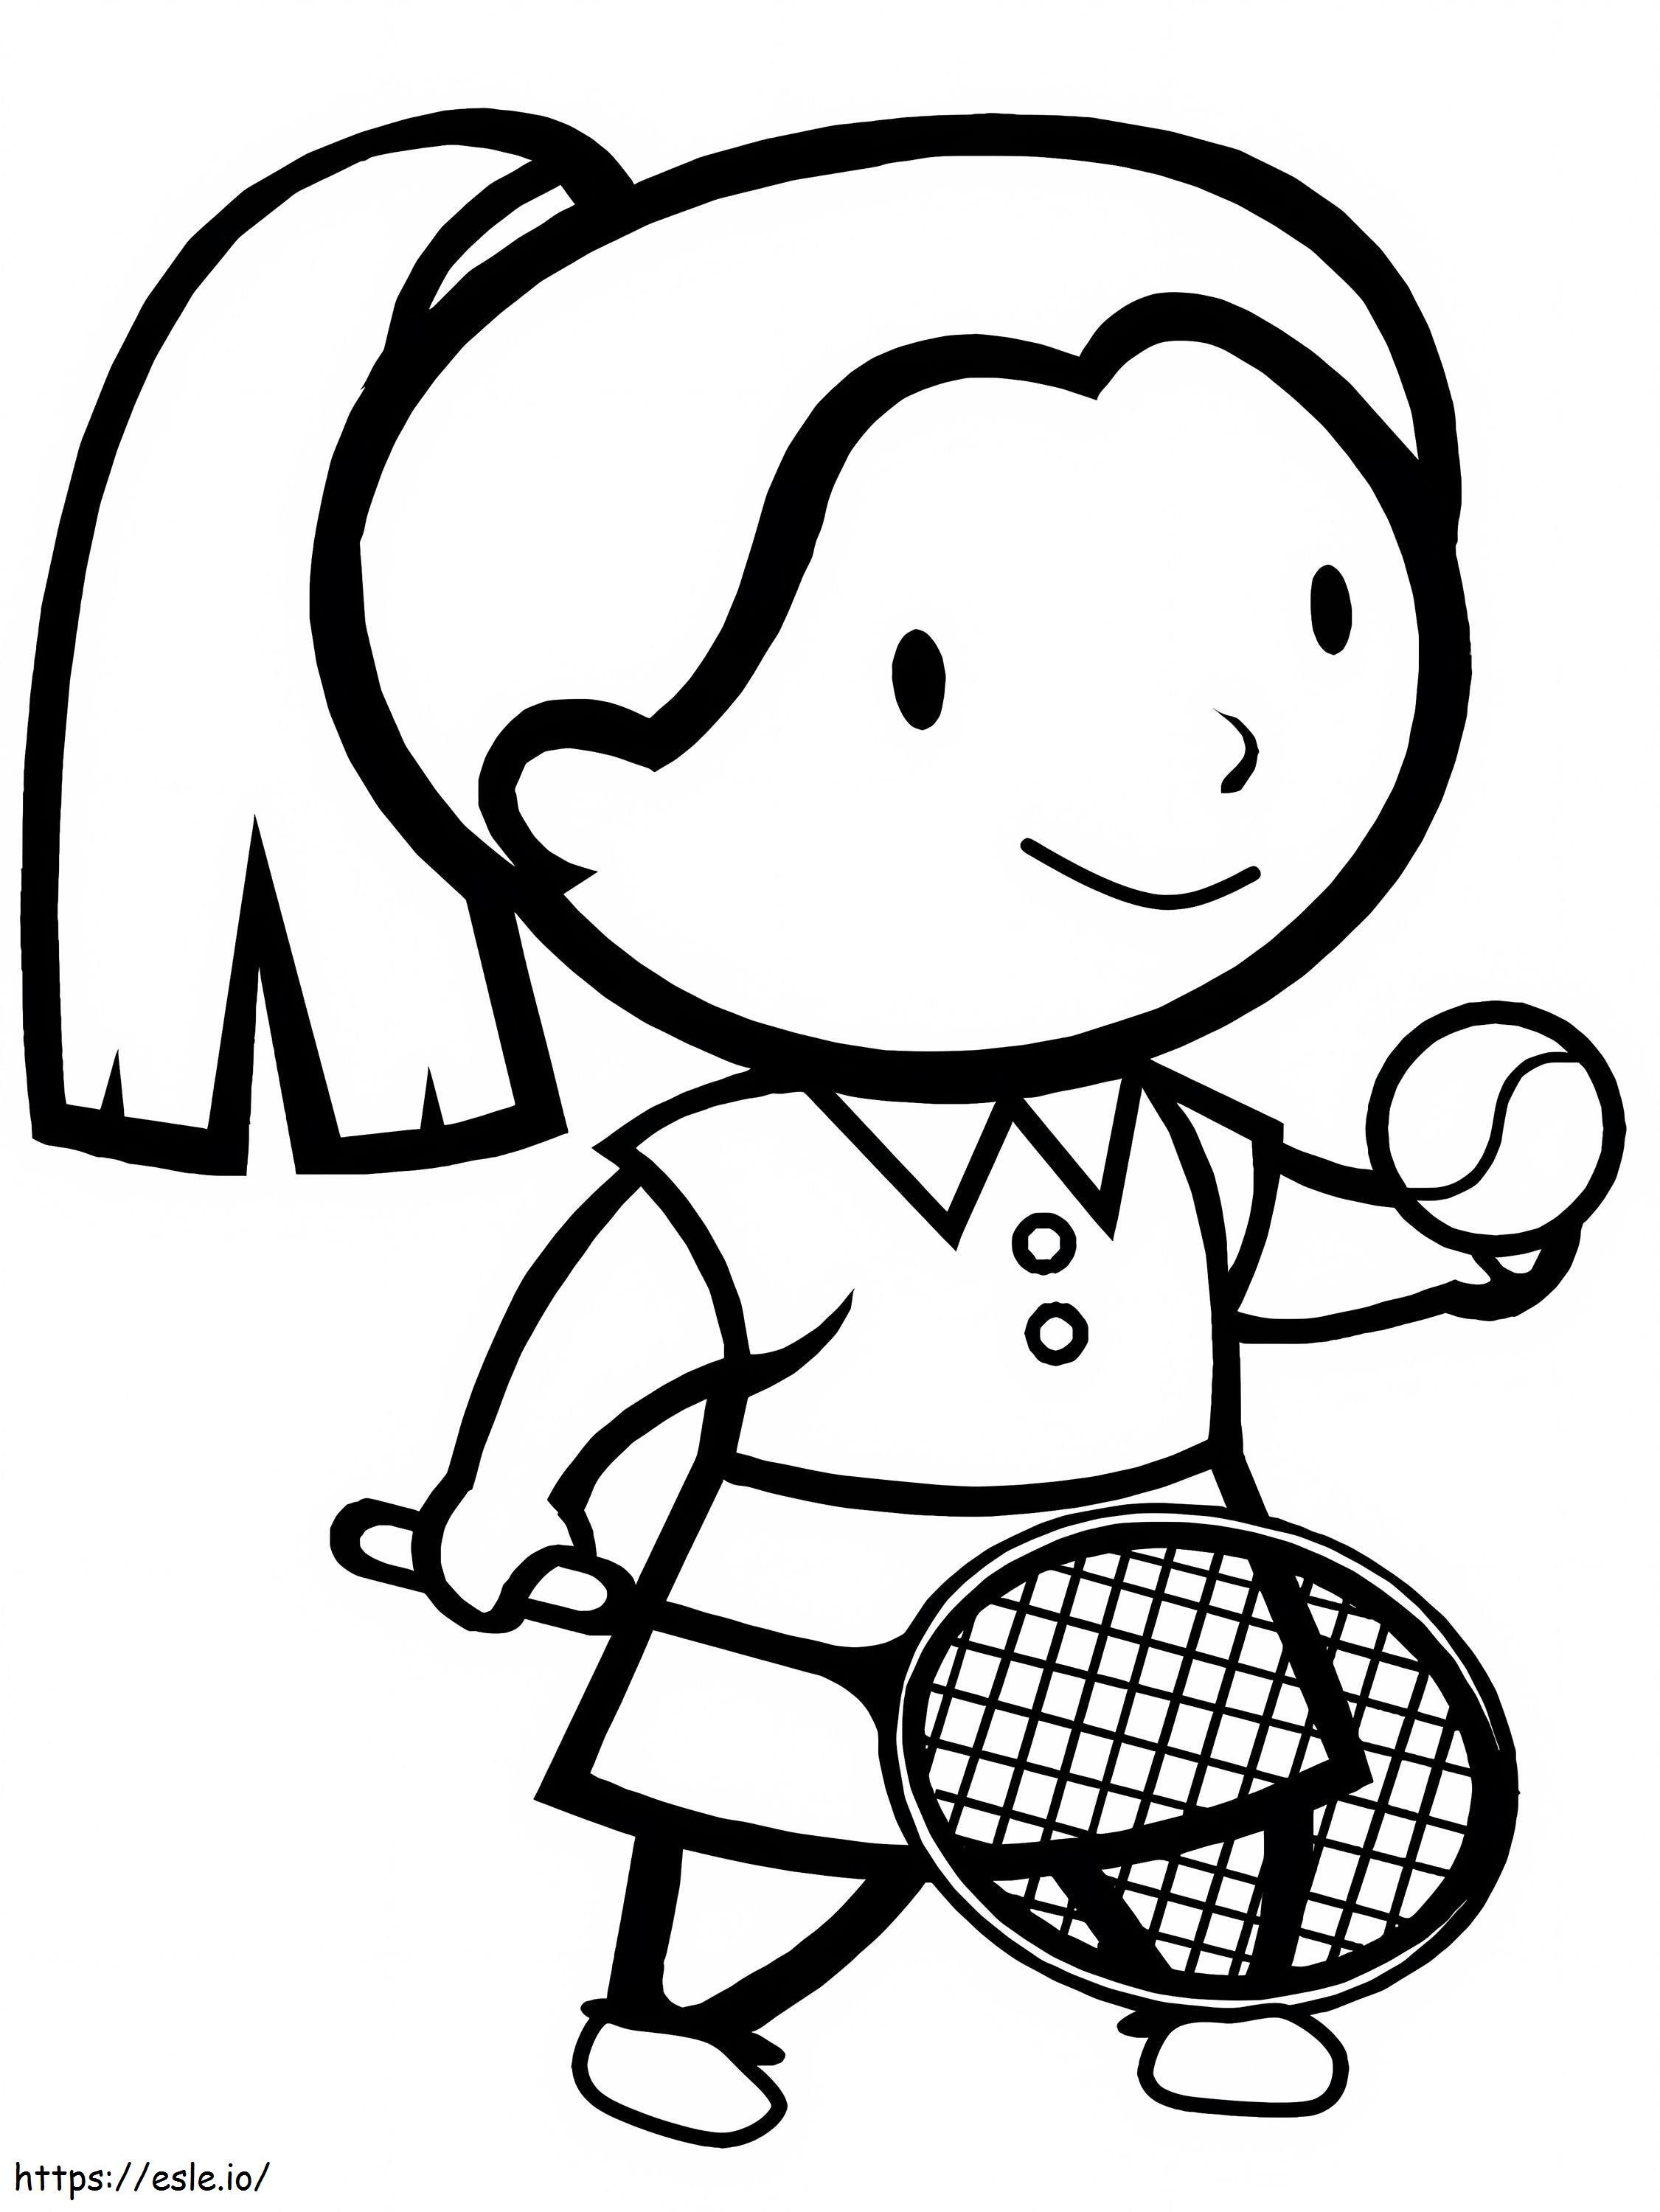 1556940512 Tennisloring Pages Kids Playing Sport Girl Of Sports For Printable 850X1133 1 coloring page